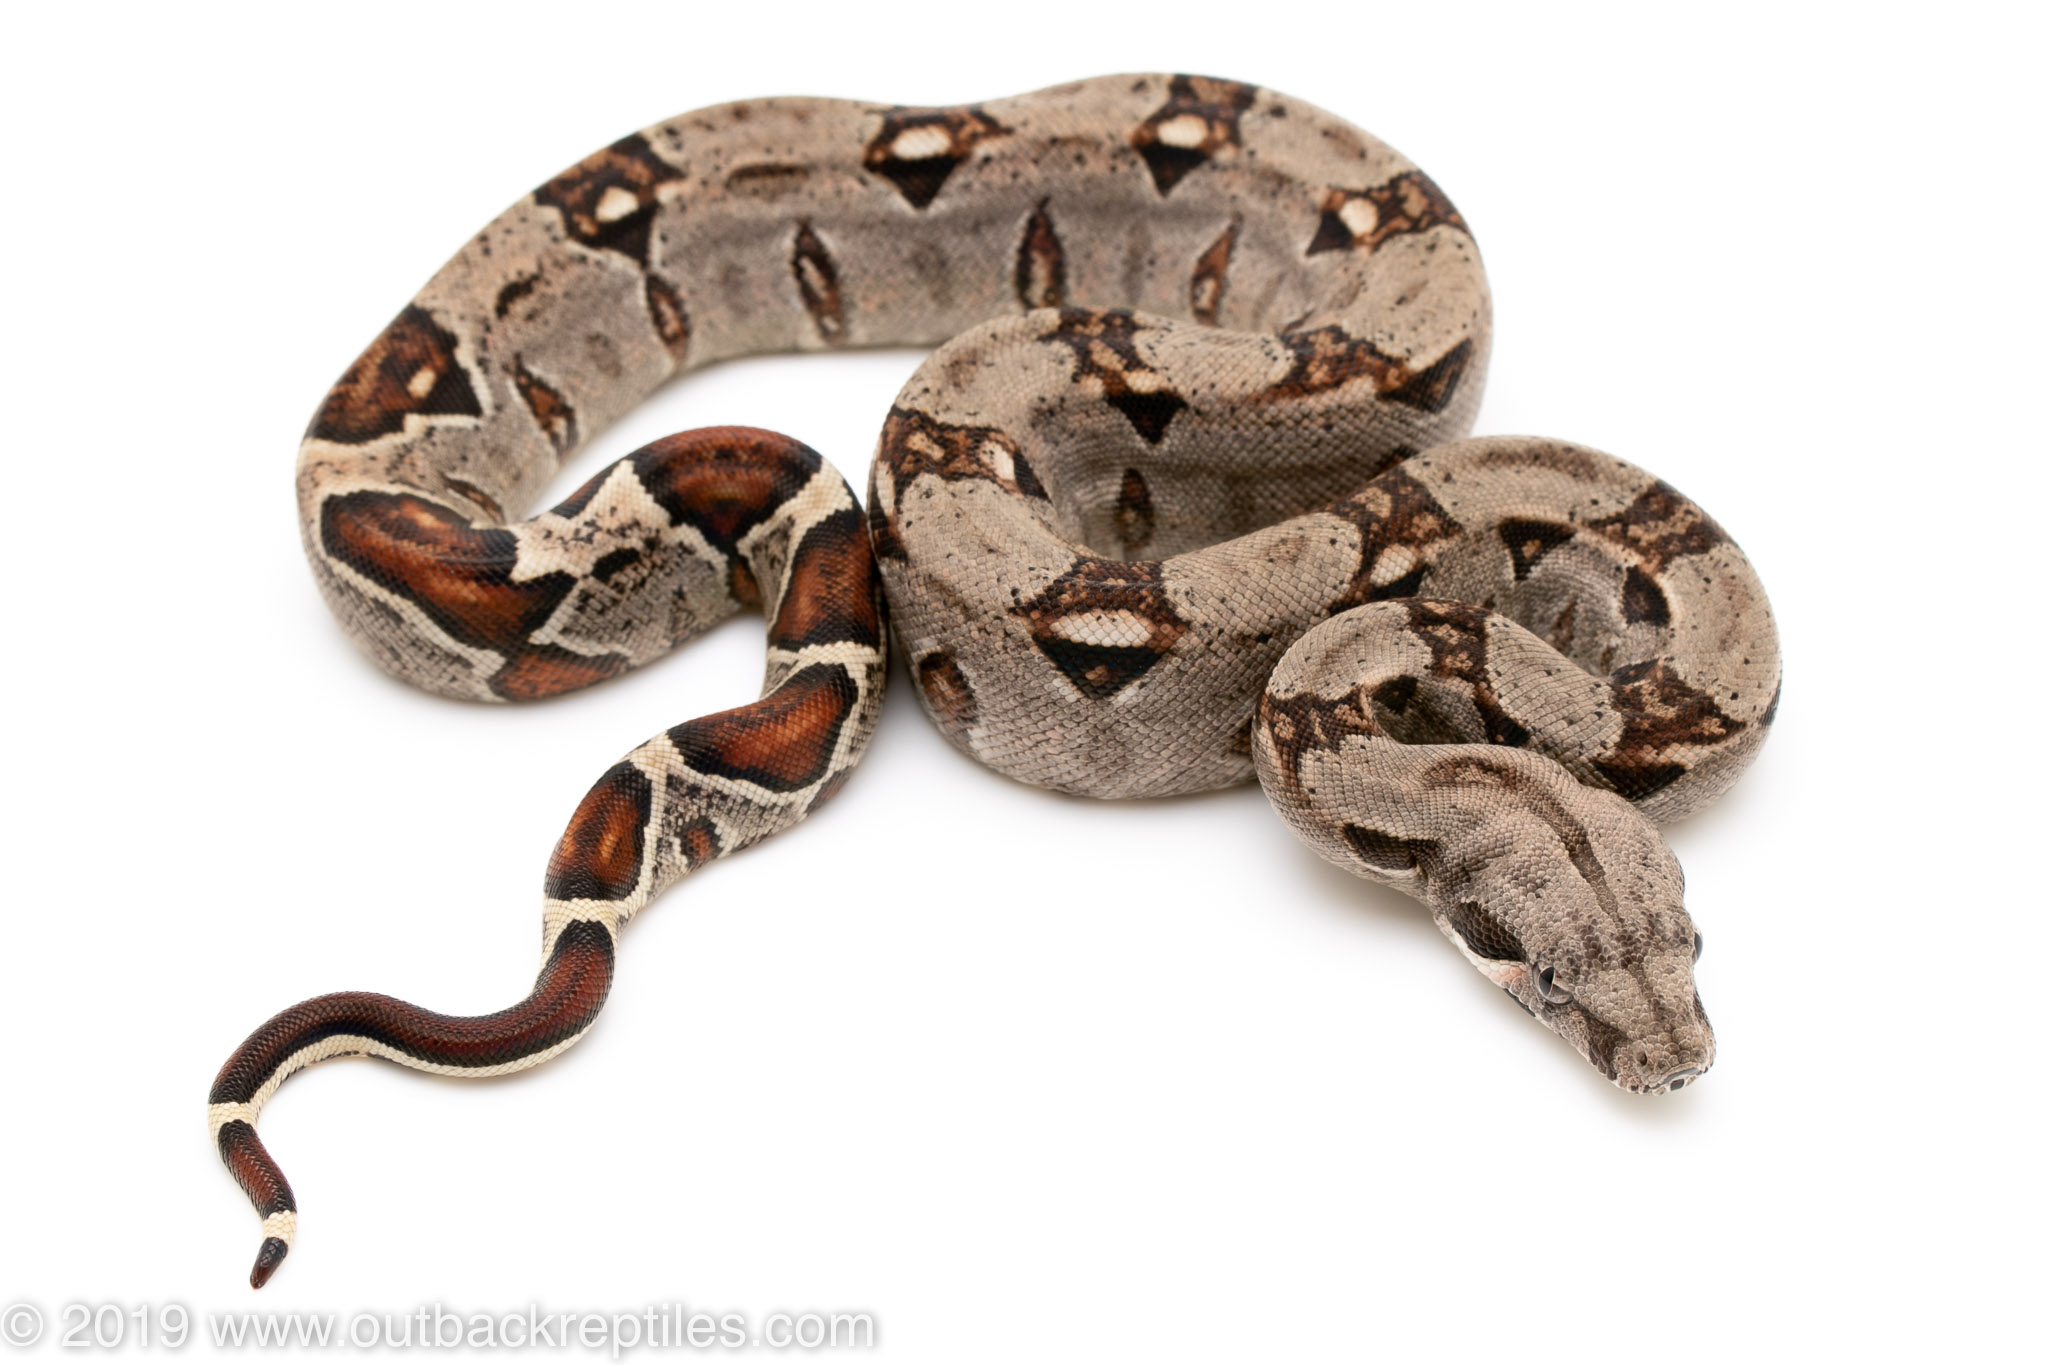 Colombian Redtail Boa For Sale Outback Reptiles,Cats In Heat Meaning